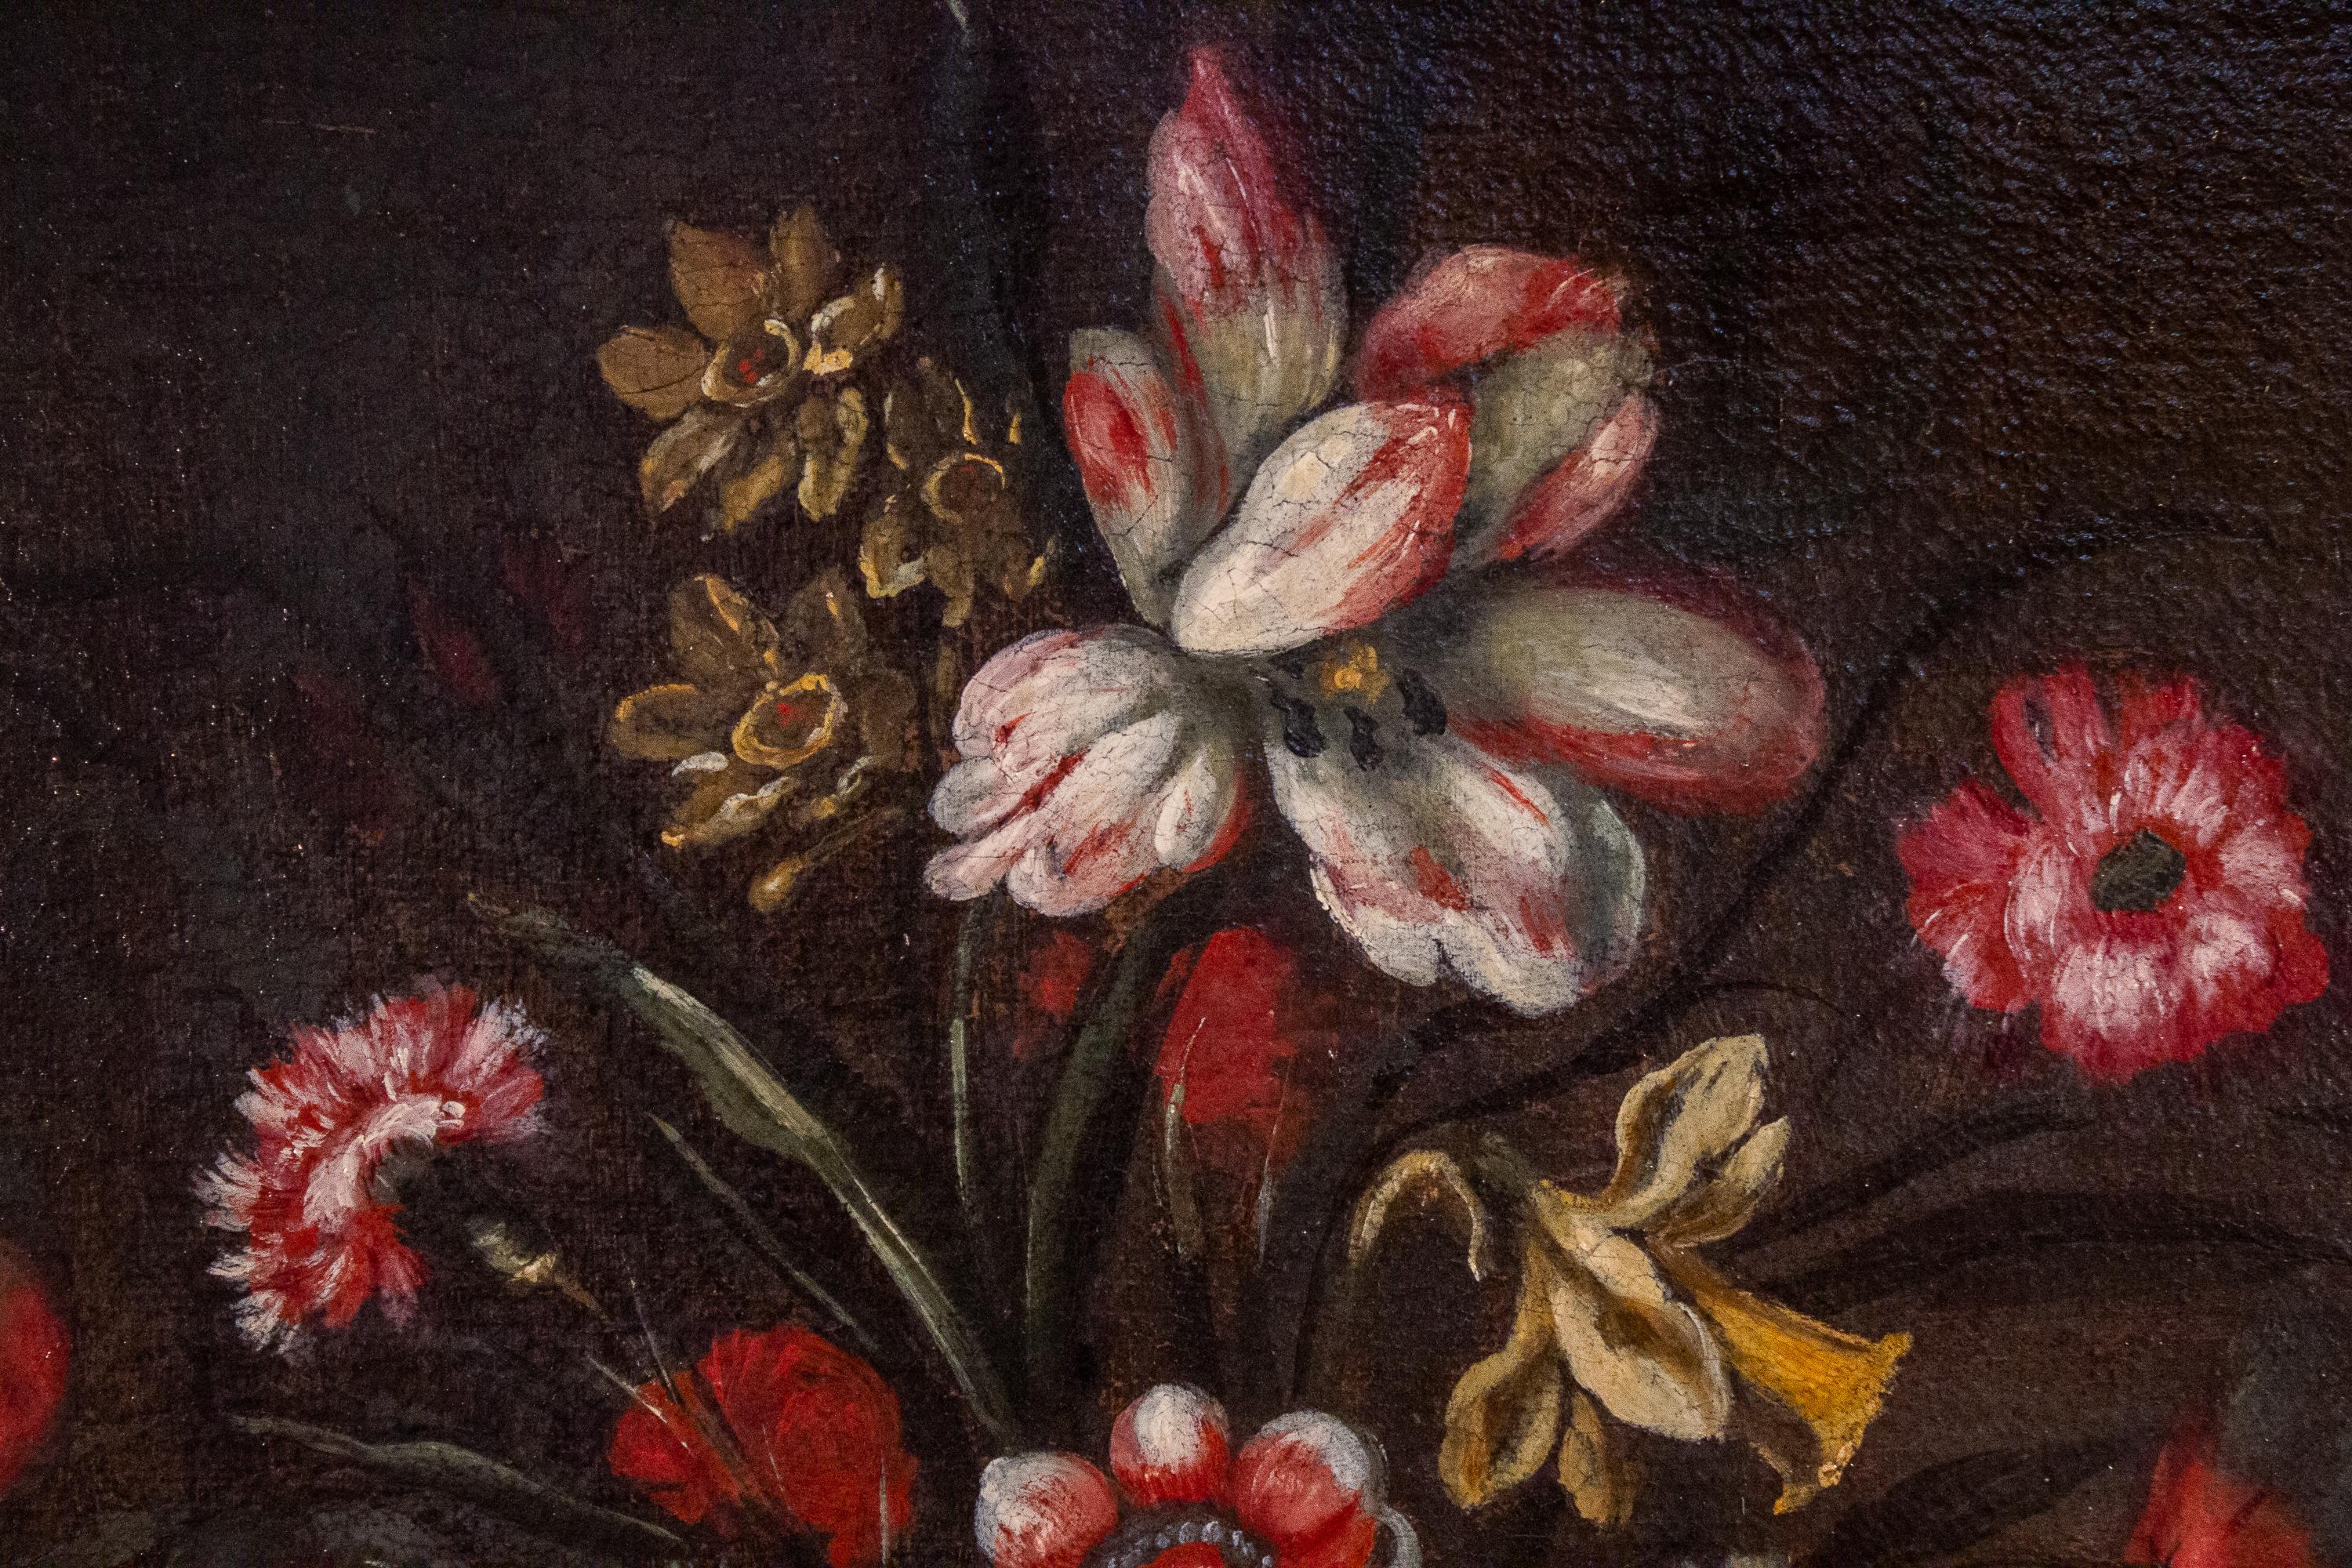 Pair of 18th century Italian Still Life Paintings of Flowers   For Sale 4